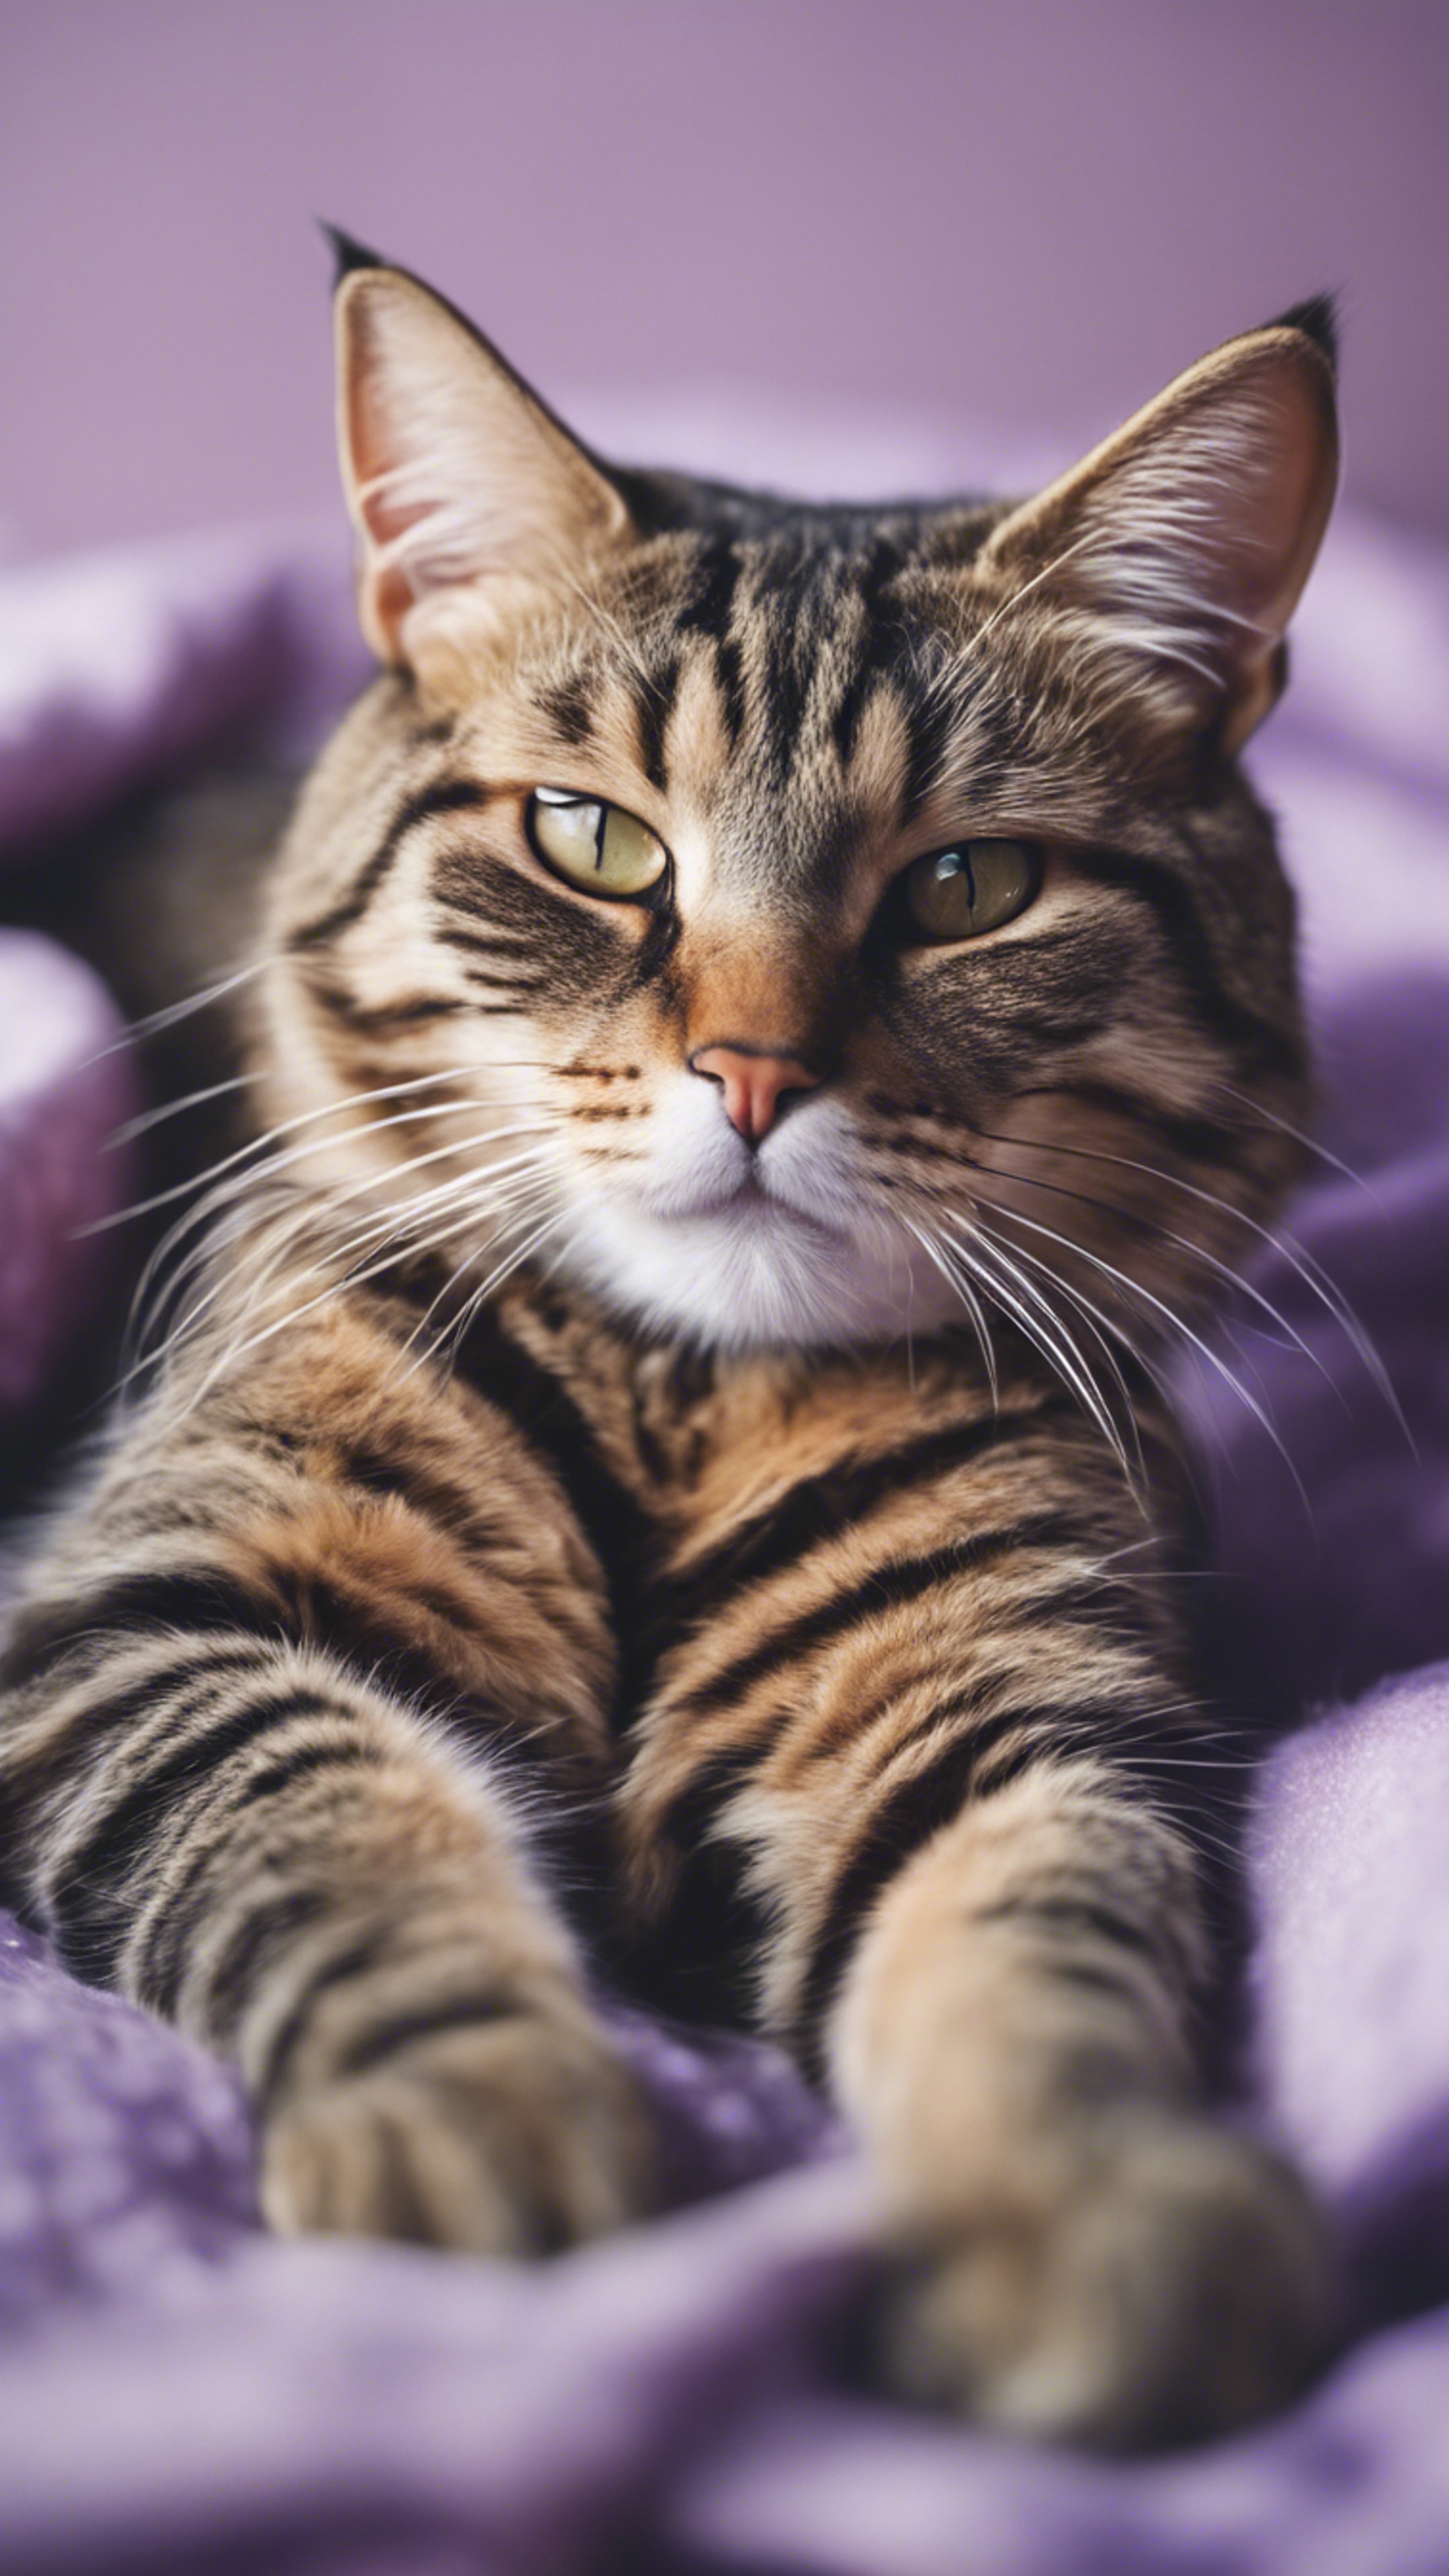 A candid portrait of a tabby cat lounging on a pastel purple blanket. Ταπετσαρία[f4cf510d1a1d426195dc]